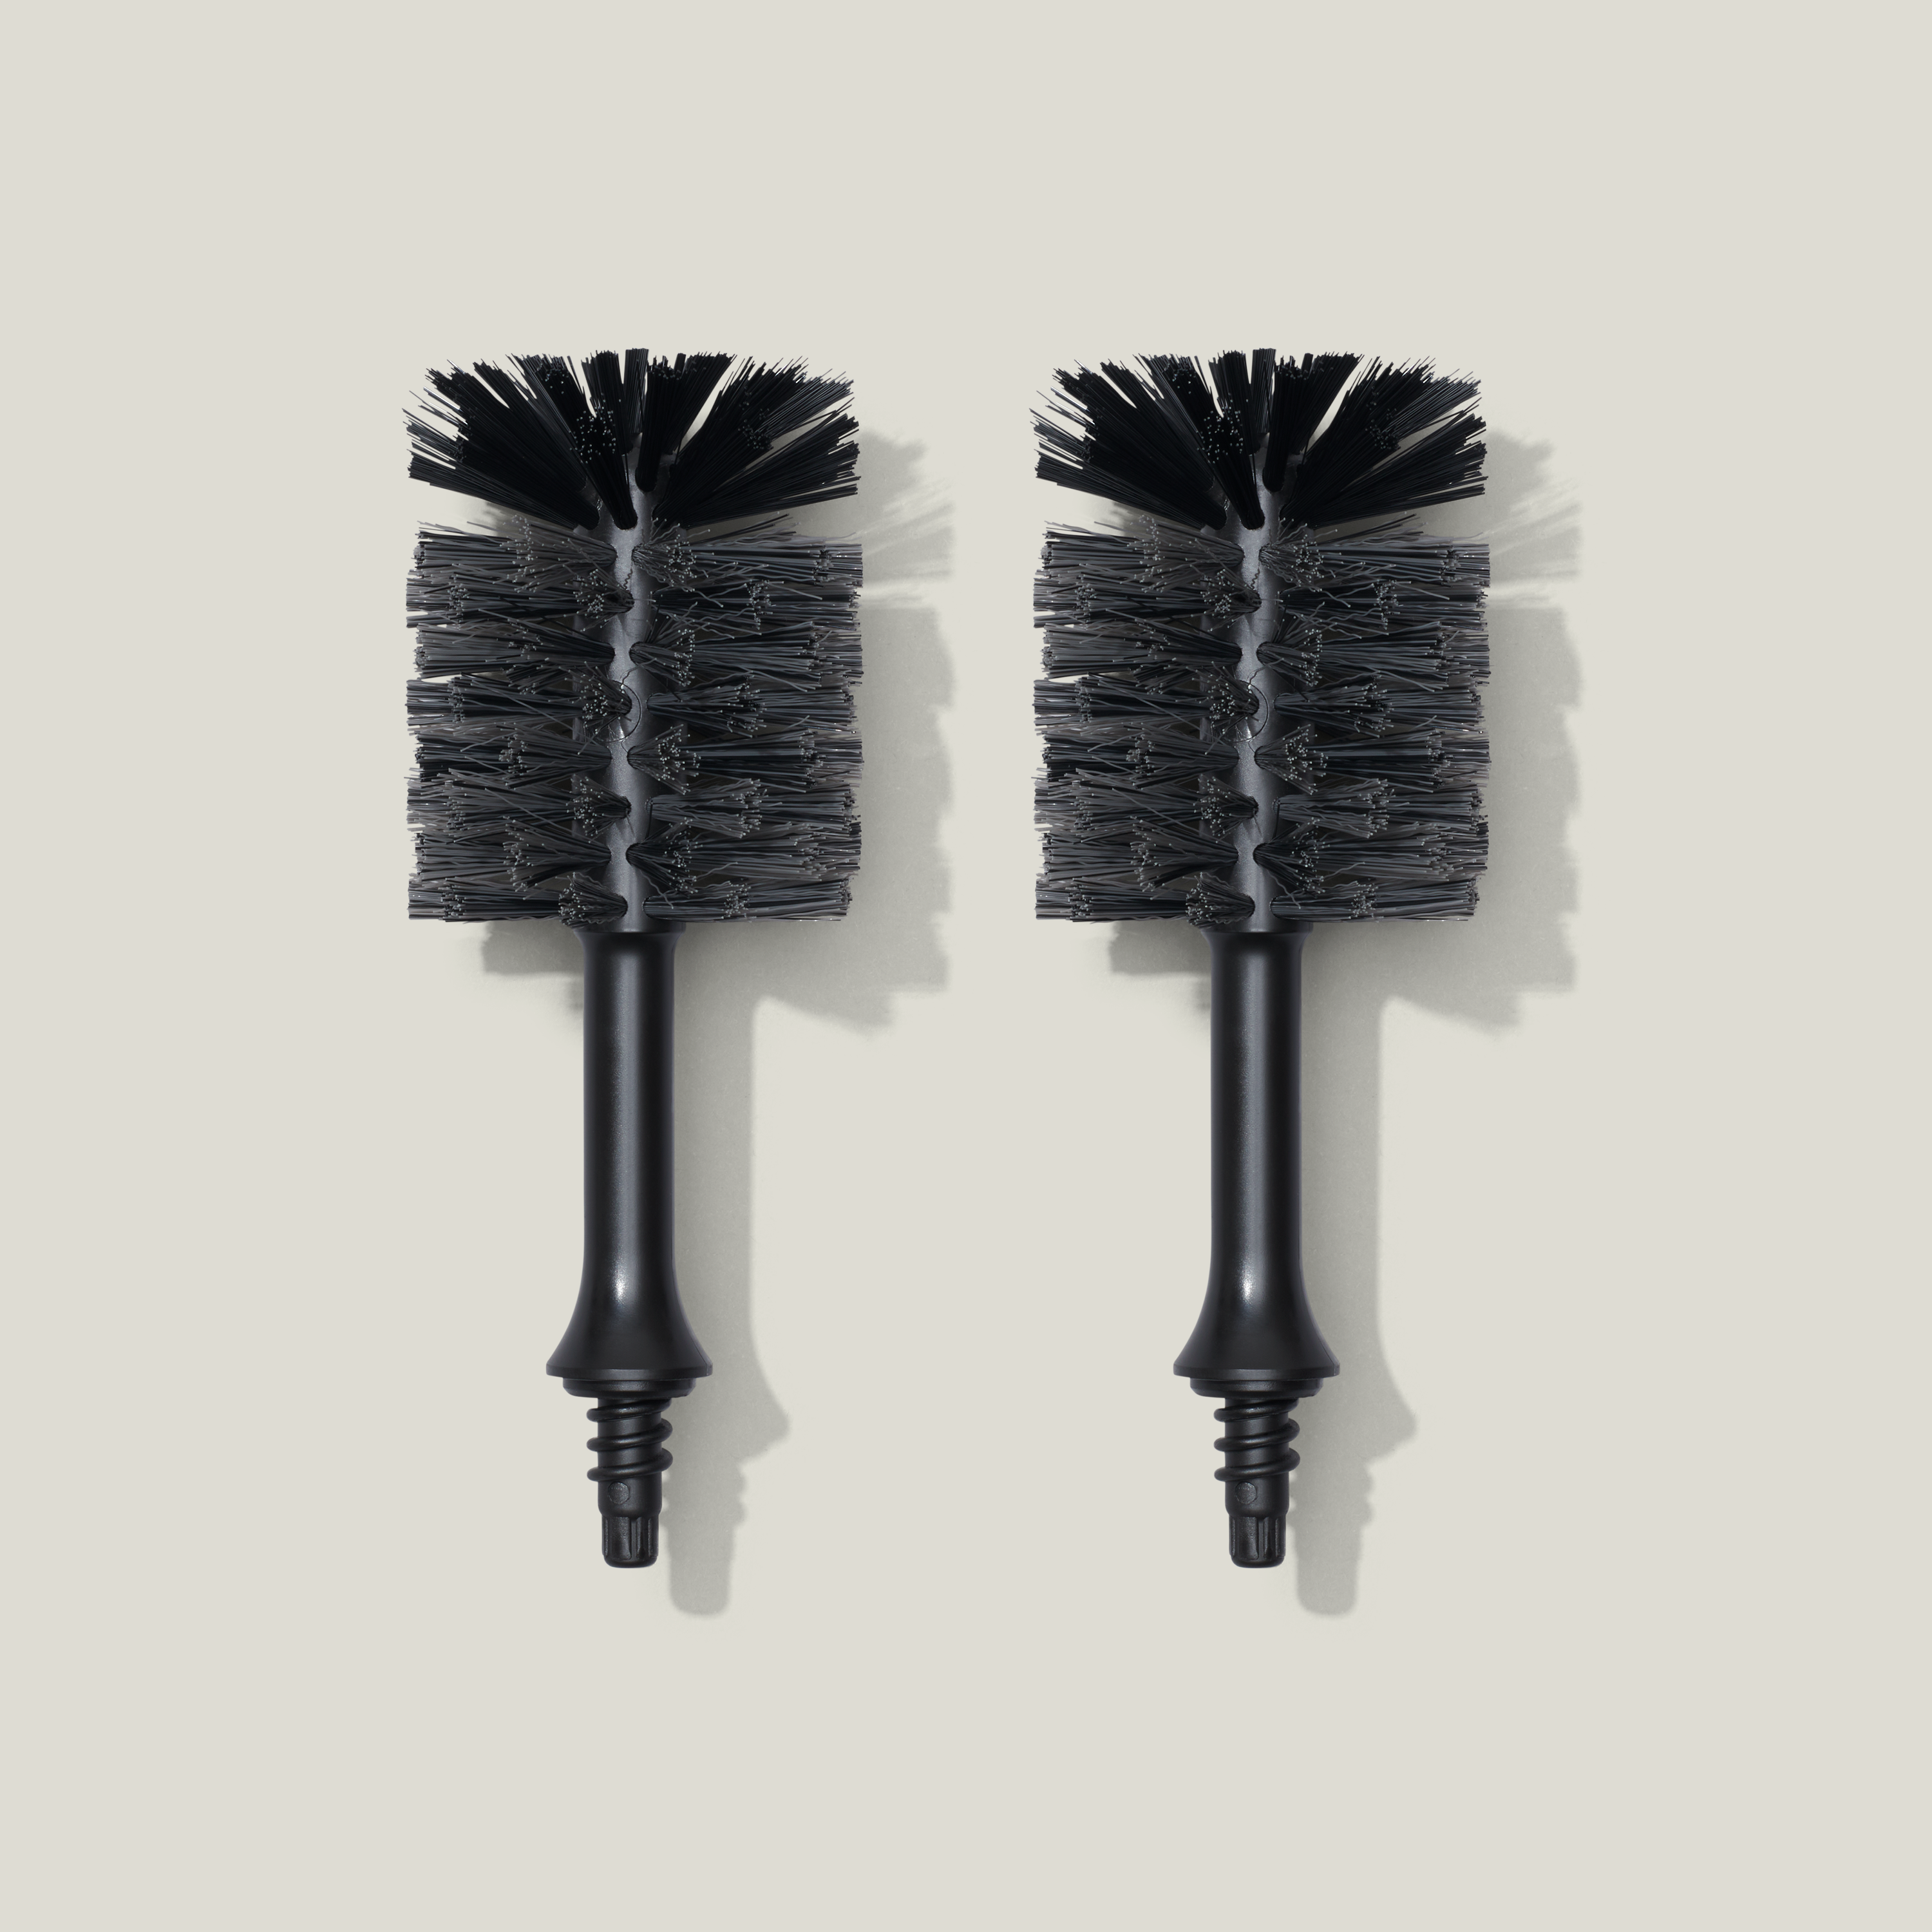 Curio Homegoods 2-pack The Ionic Bottle Brush Bristles in Onyx